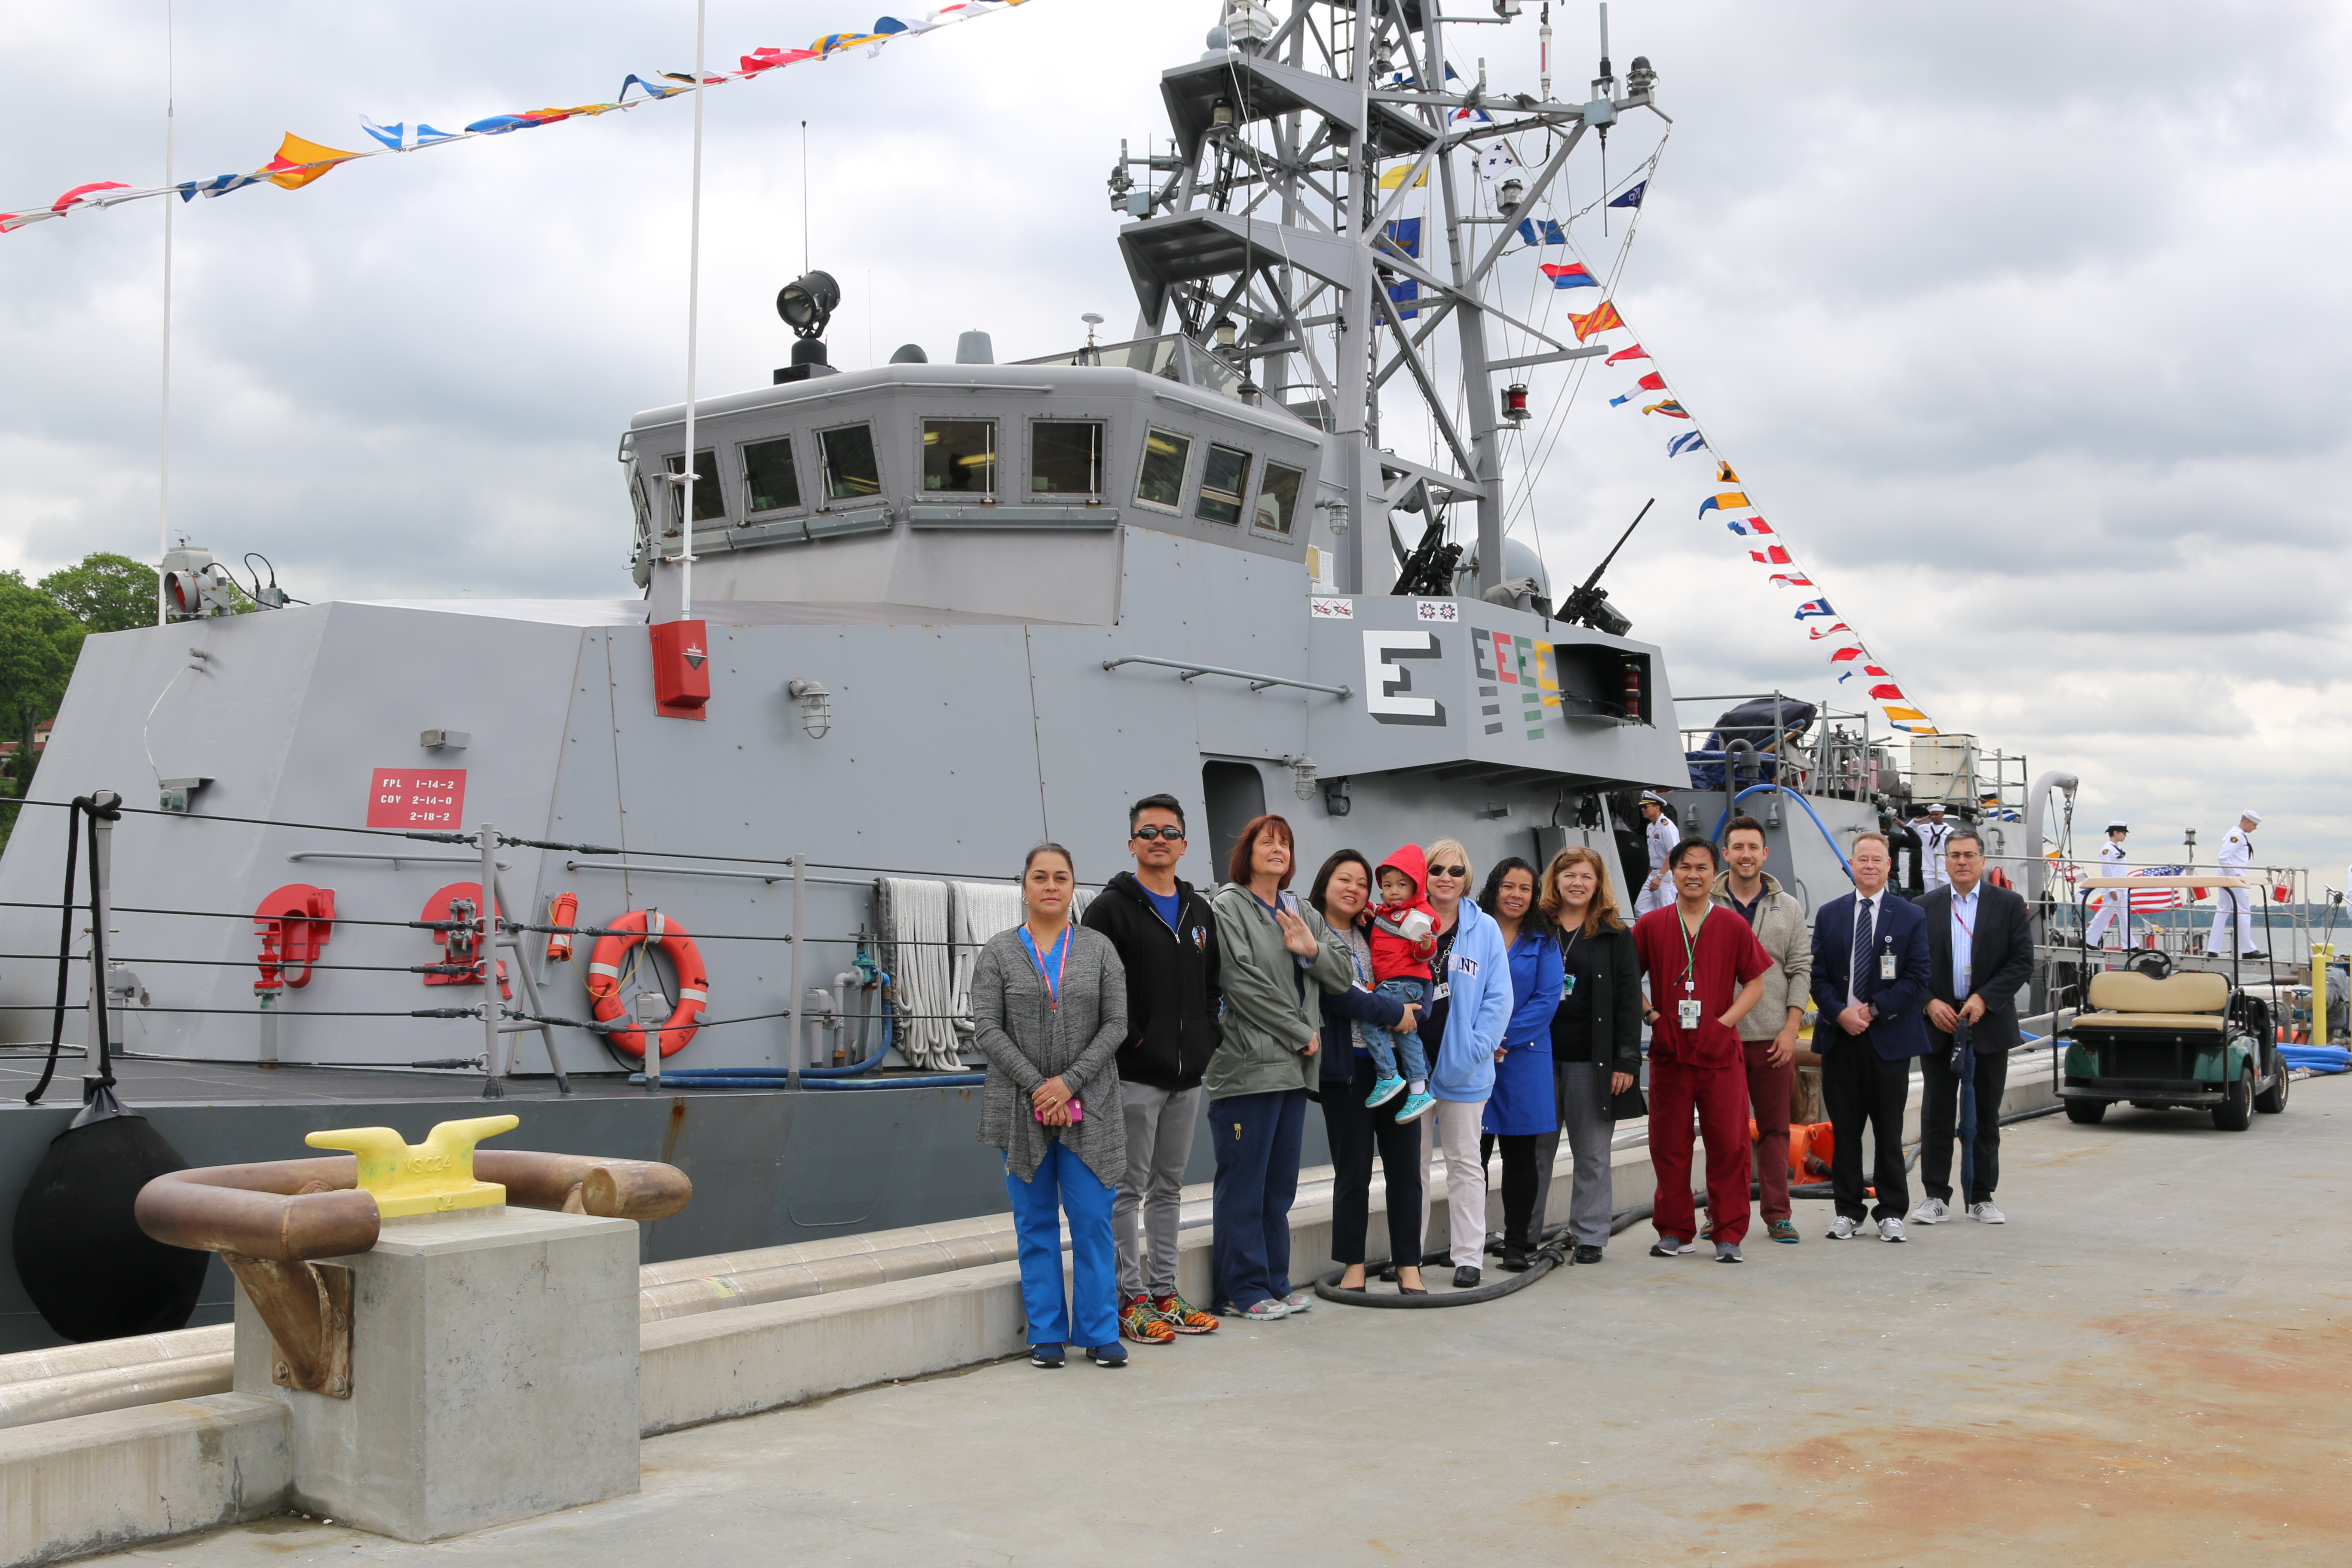 Northwell Health and Patten Health Services visit USS Zephyr